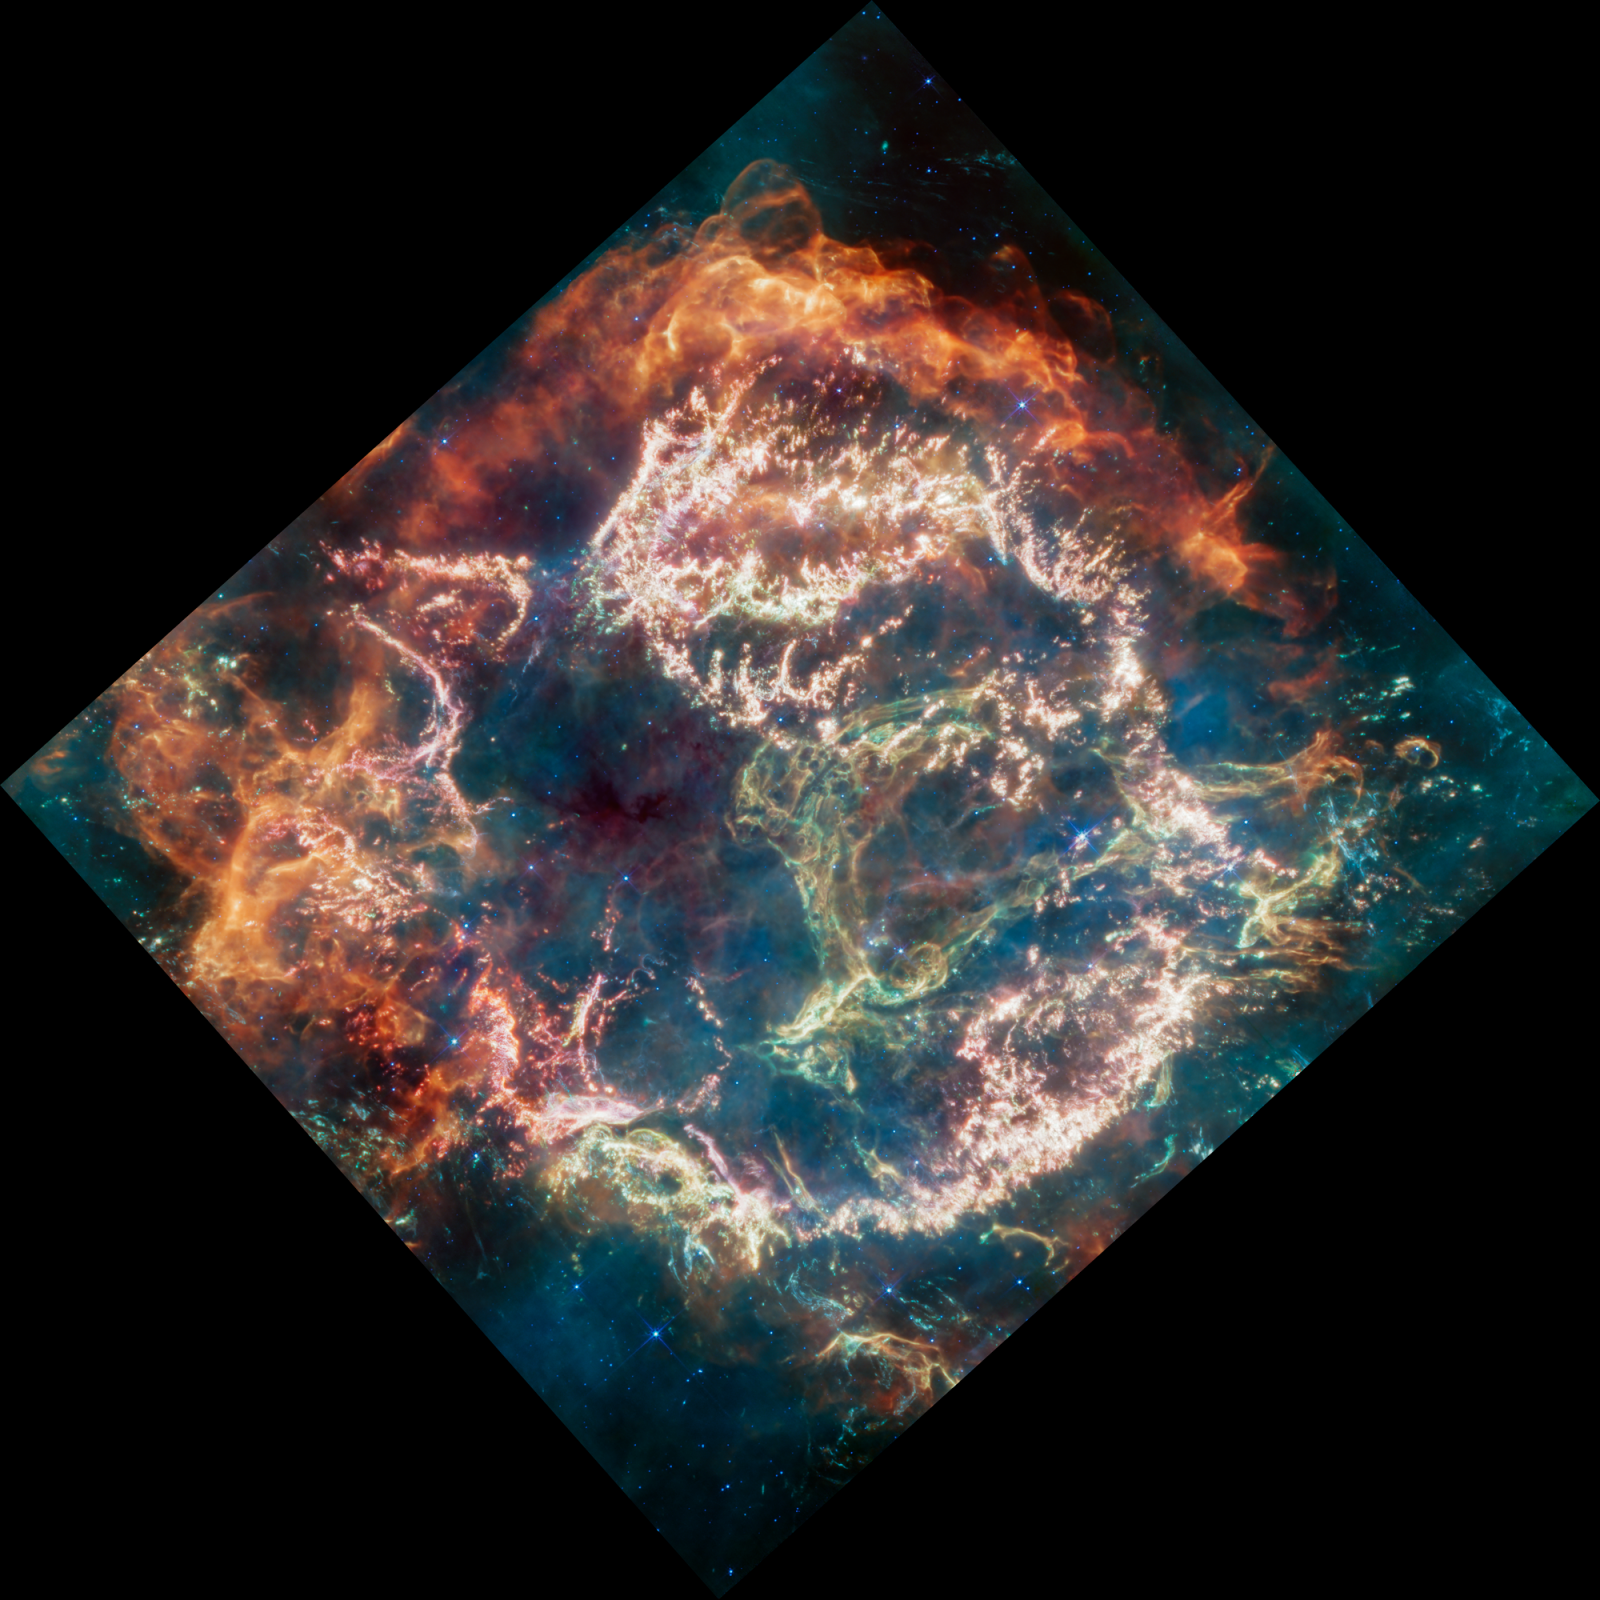 The James Webb Space Telescope captured a more detailed image of an explosion in space than the Hubble Telescope